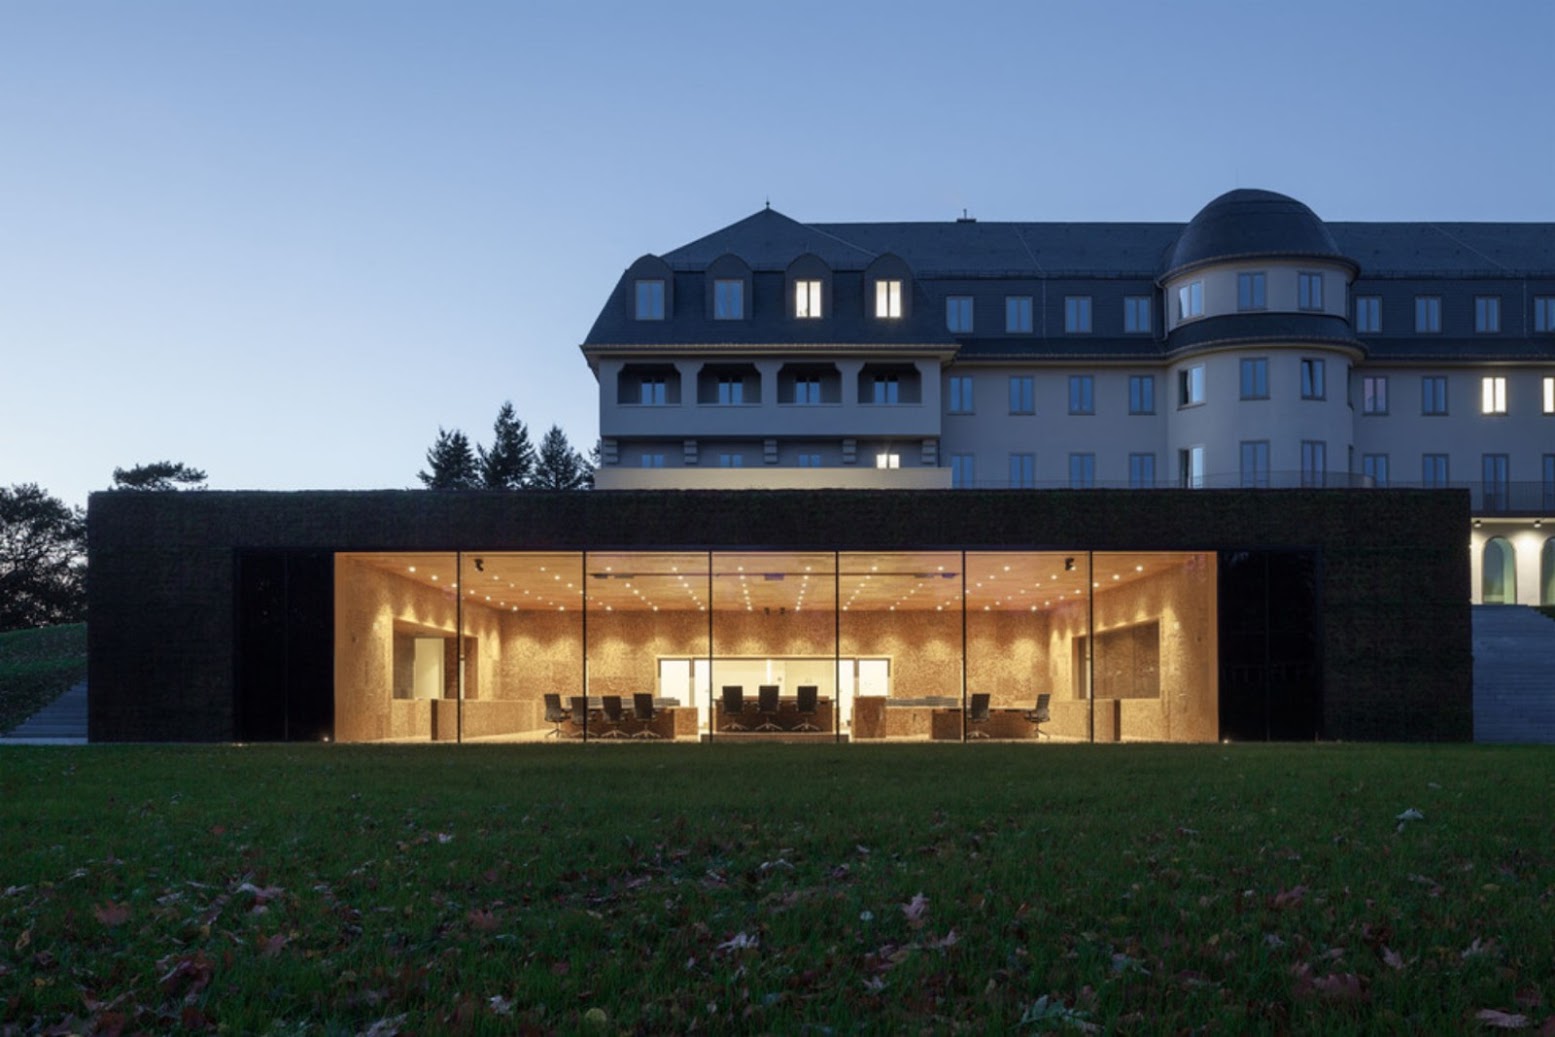 Parliament of the German Speaking Community by Atelier